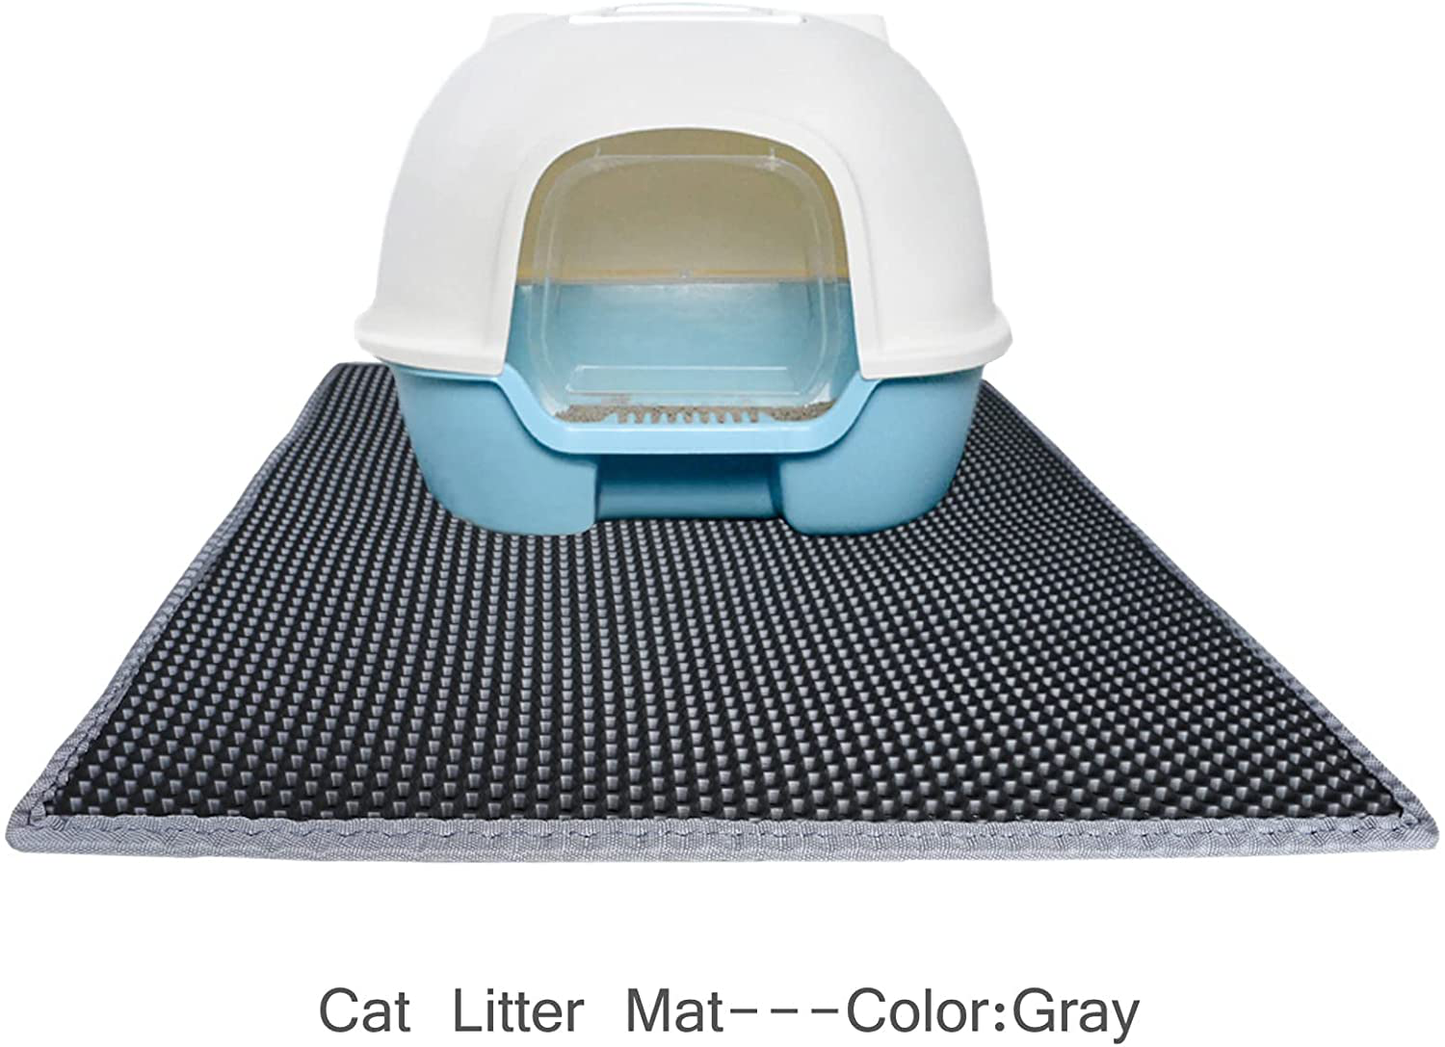 Pemony Cat Litter Mat Double Layer Design, Cat Litter Mat Large XL ,Waterproof Urine Proof Material, Easy Clean Washable Scatter Control, Easy to Release Litter (23.5X29.5 Inch (Pack of 1), Gray)